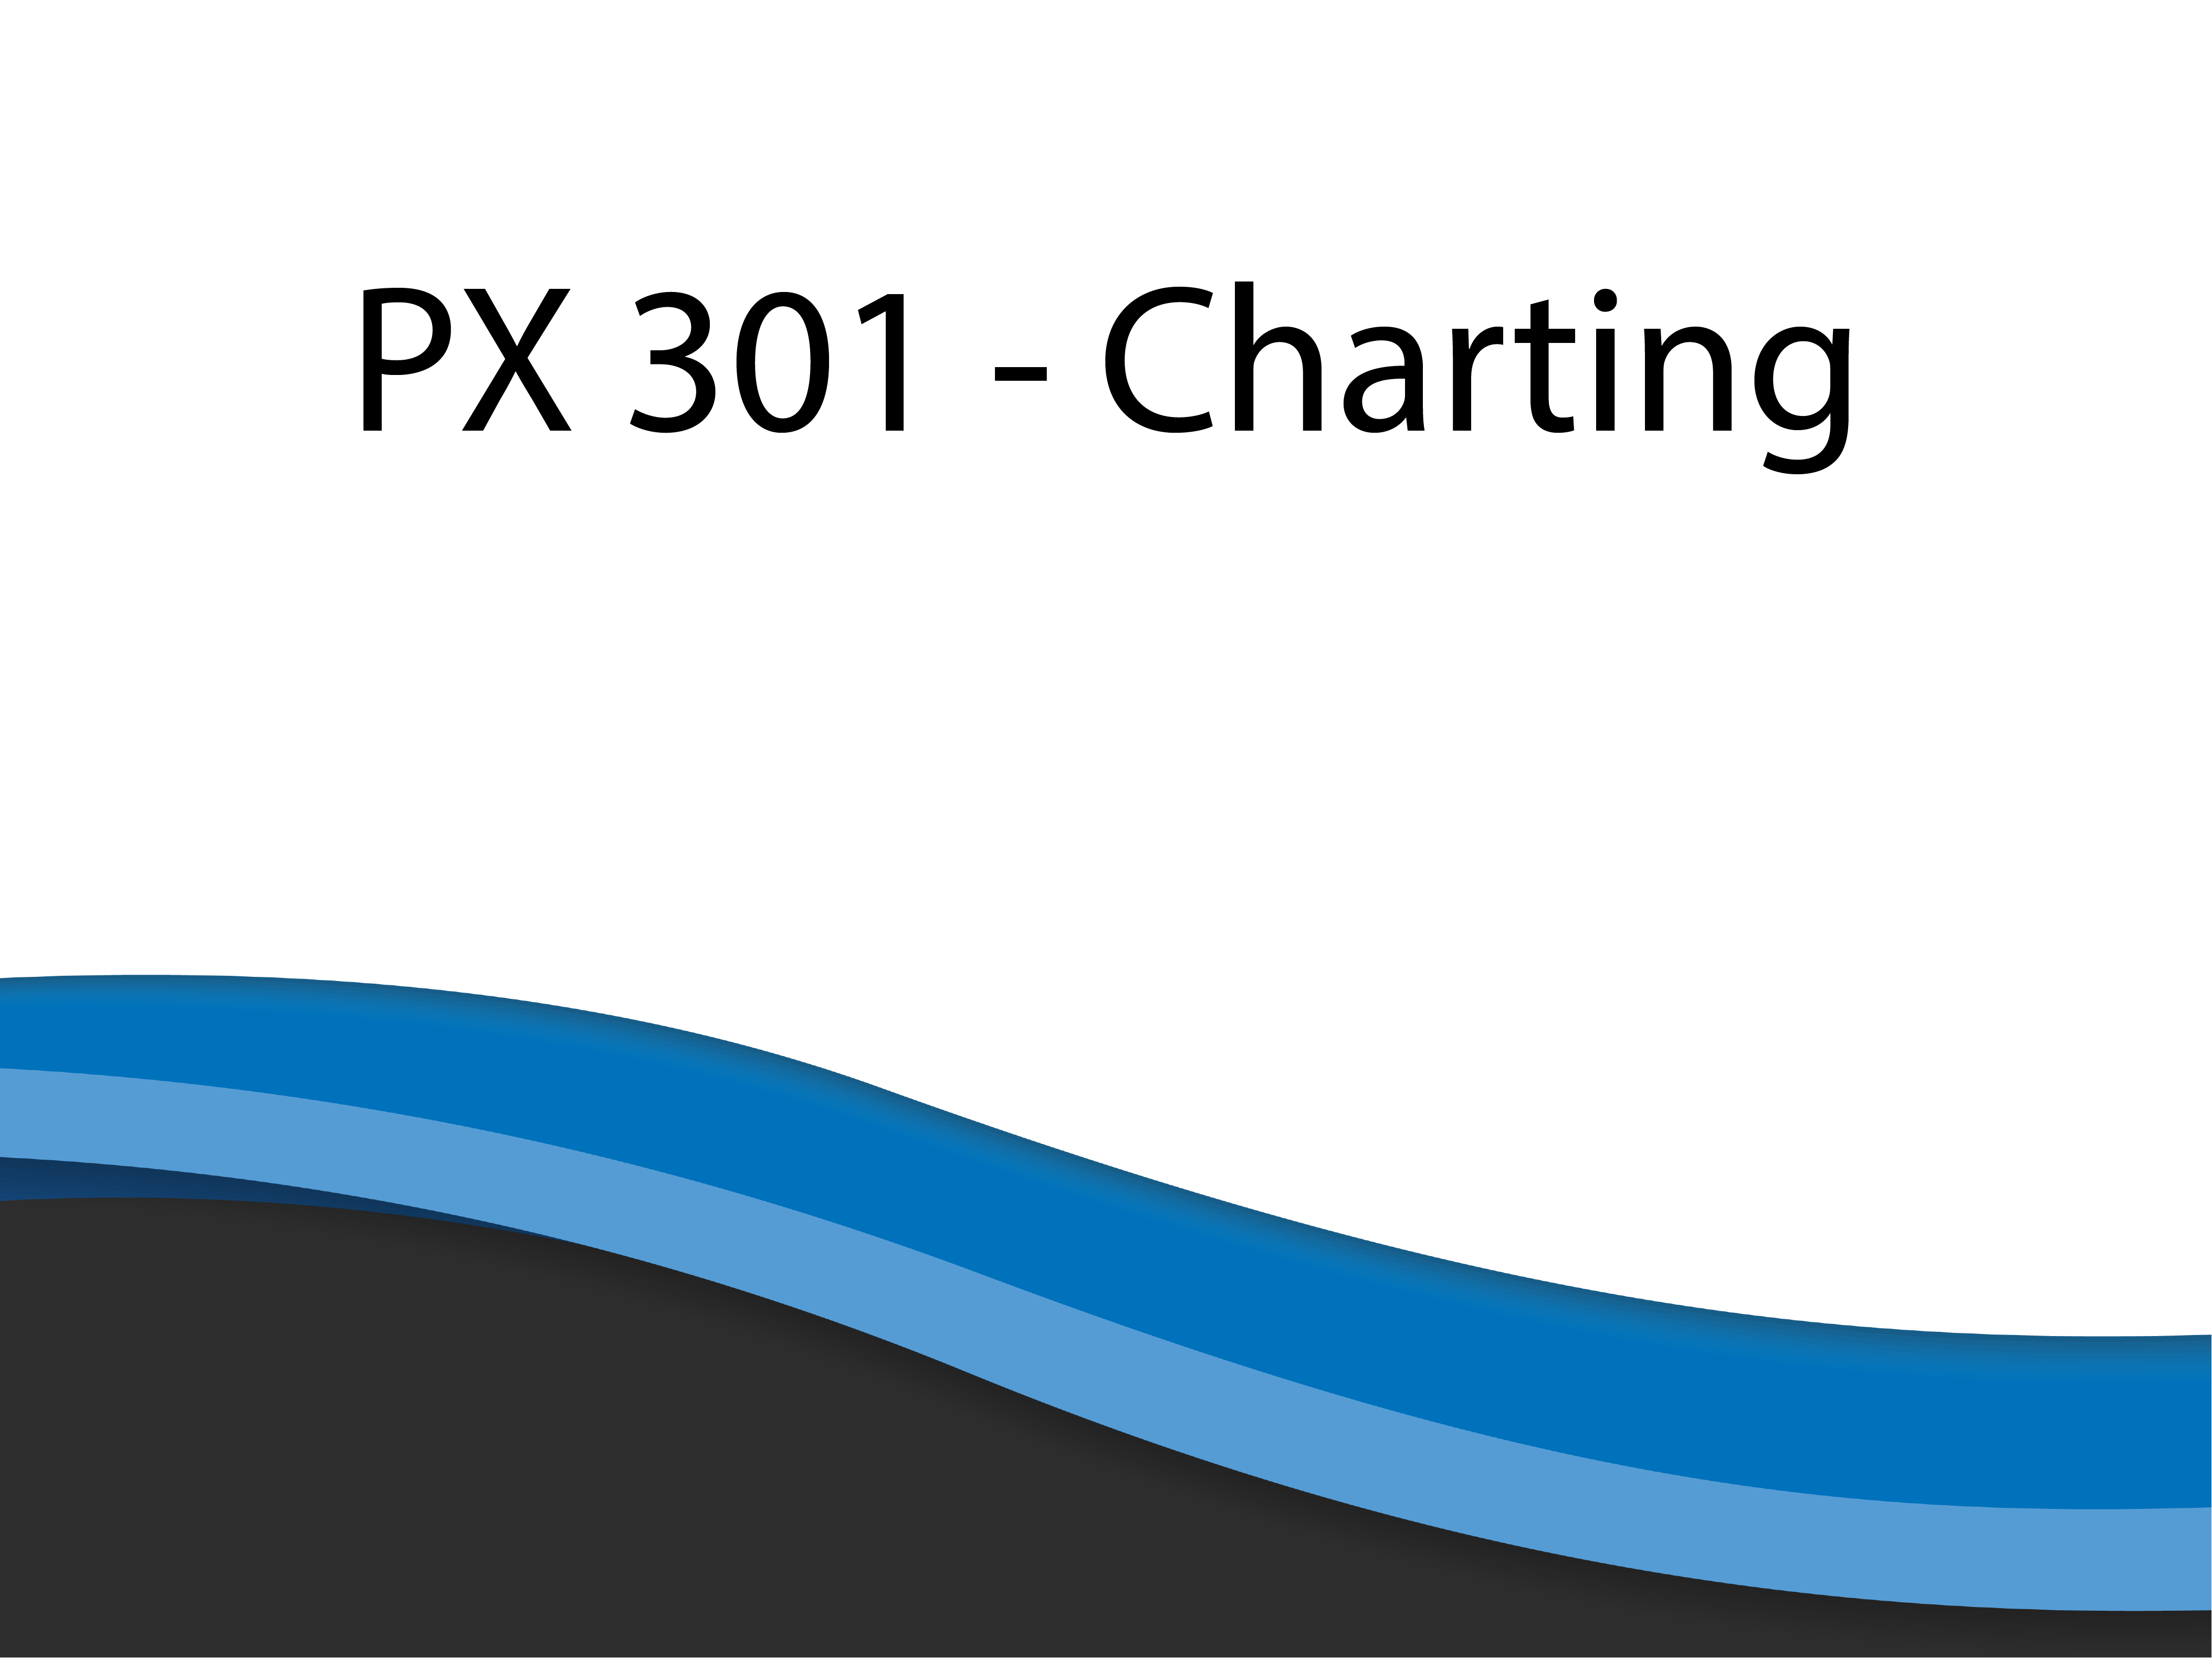 PX 301 – Power Practice Advanced Charting